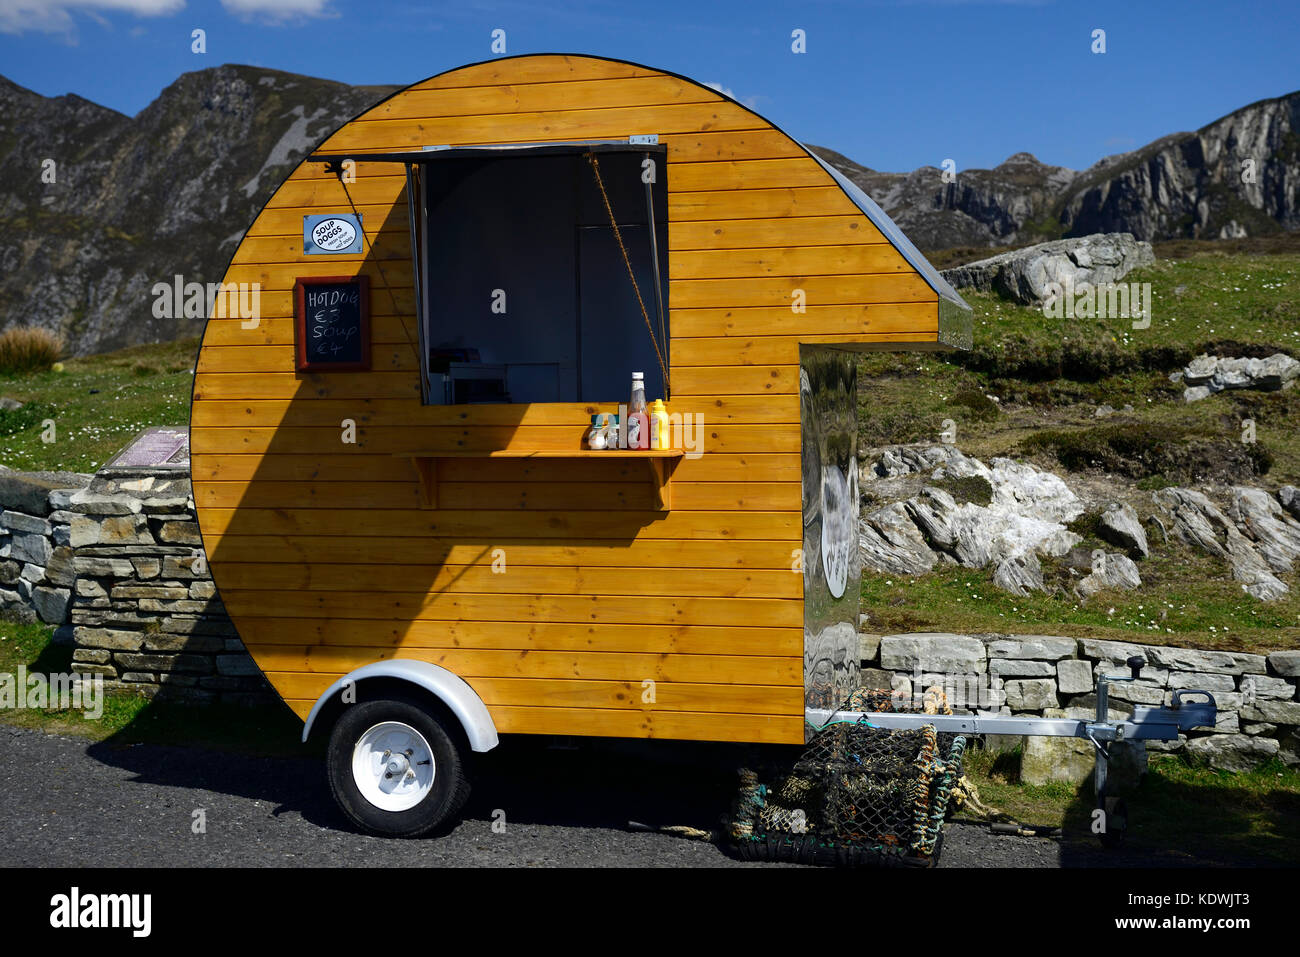 hot dog, hotdogs, food van, mobile takeaway, takeaway, food, snack, fastfood, donegal, tourist, scenic, location, slieve league, sliabh league, sliabh Stock Photo